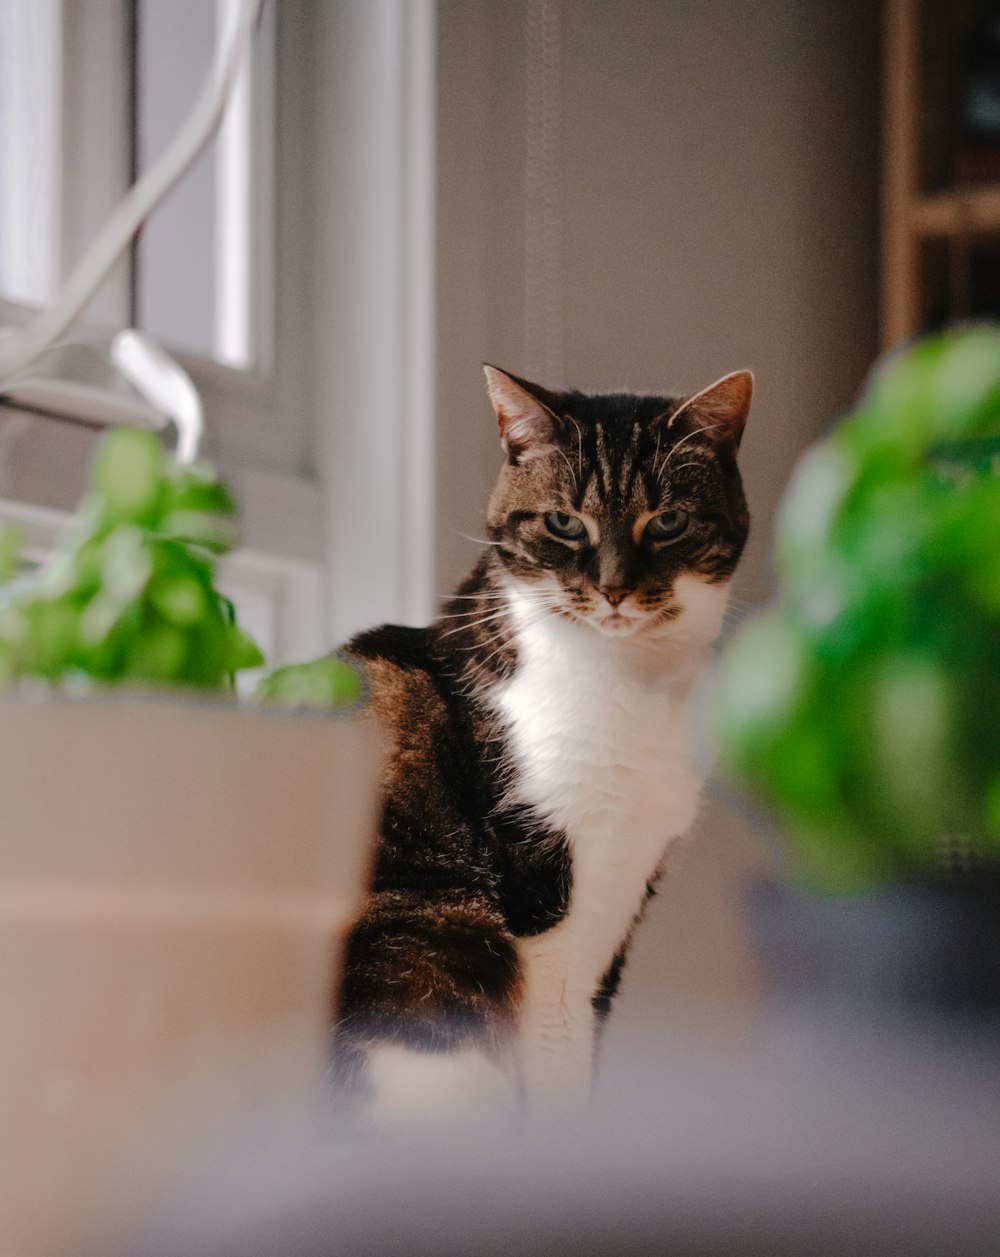 a cat sitting on a counter next to a plant